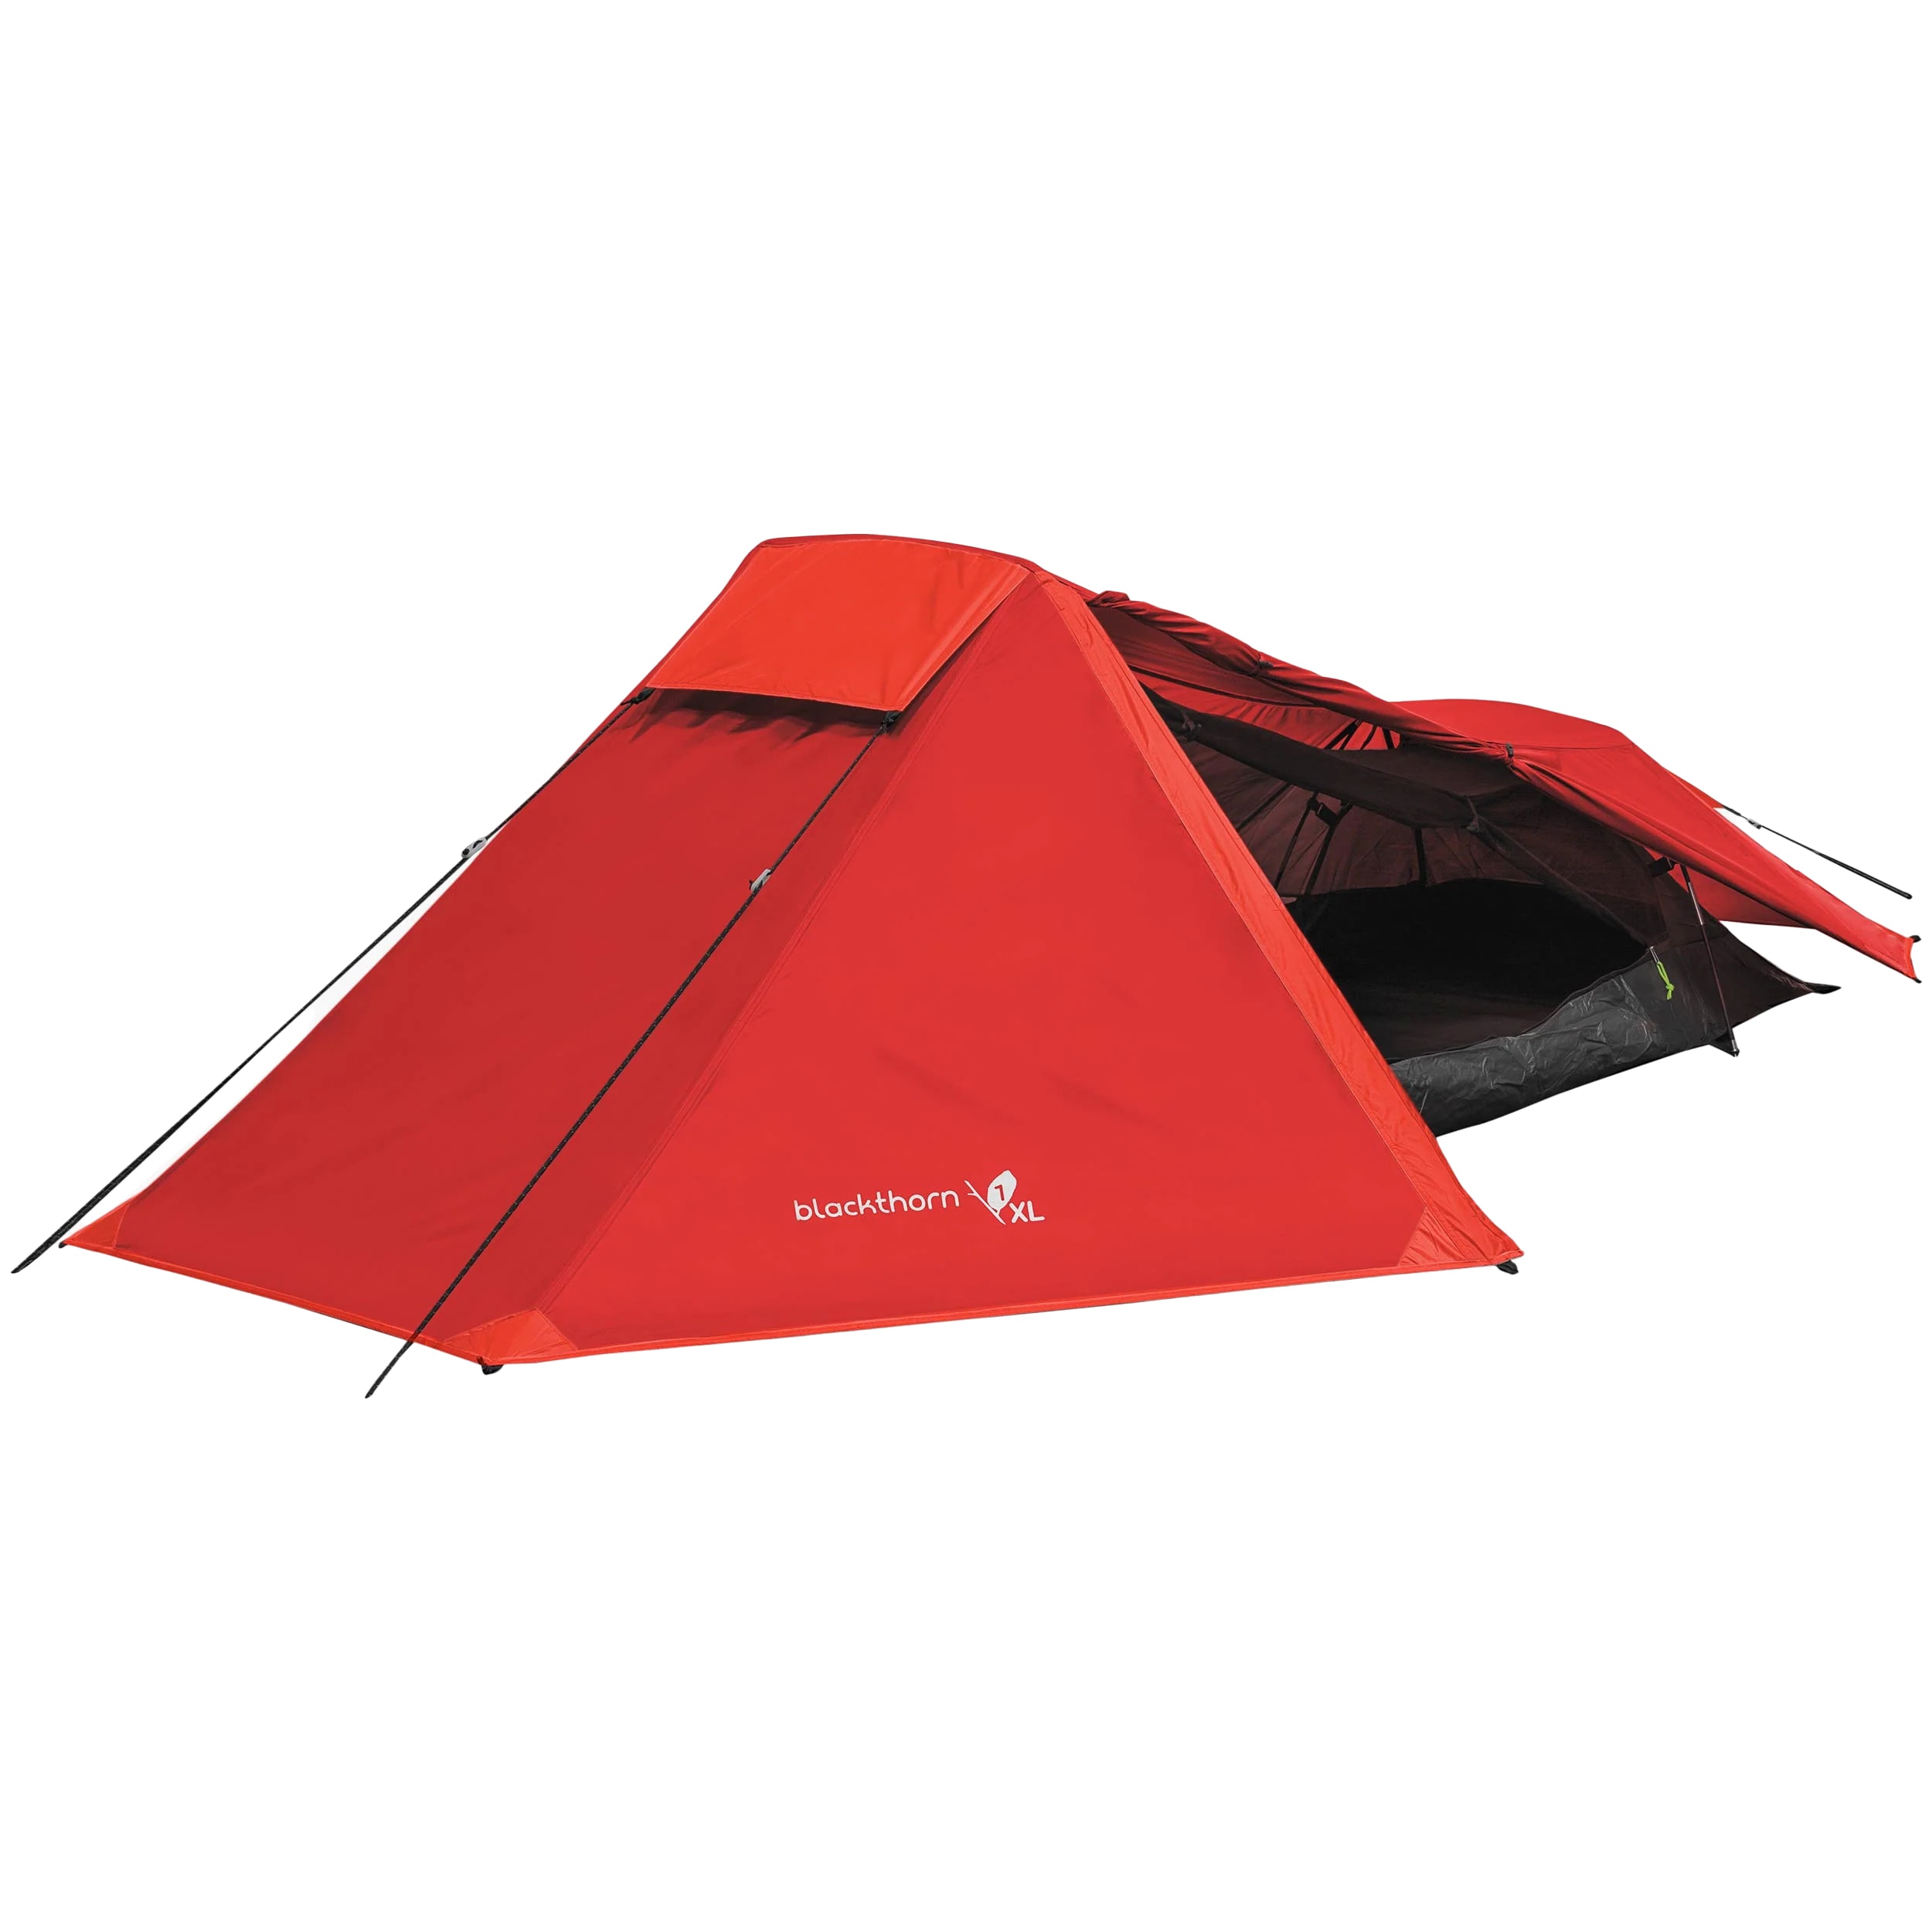 Namiot 1-osobowy Highlander Outdoor Blackthorn 1 XL - Red